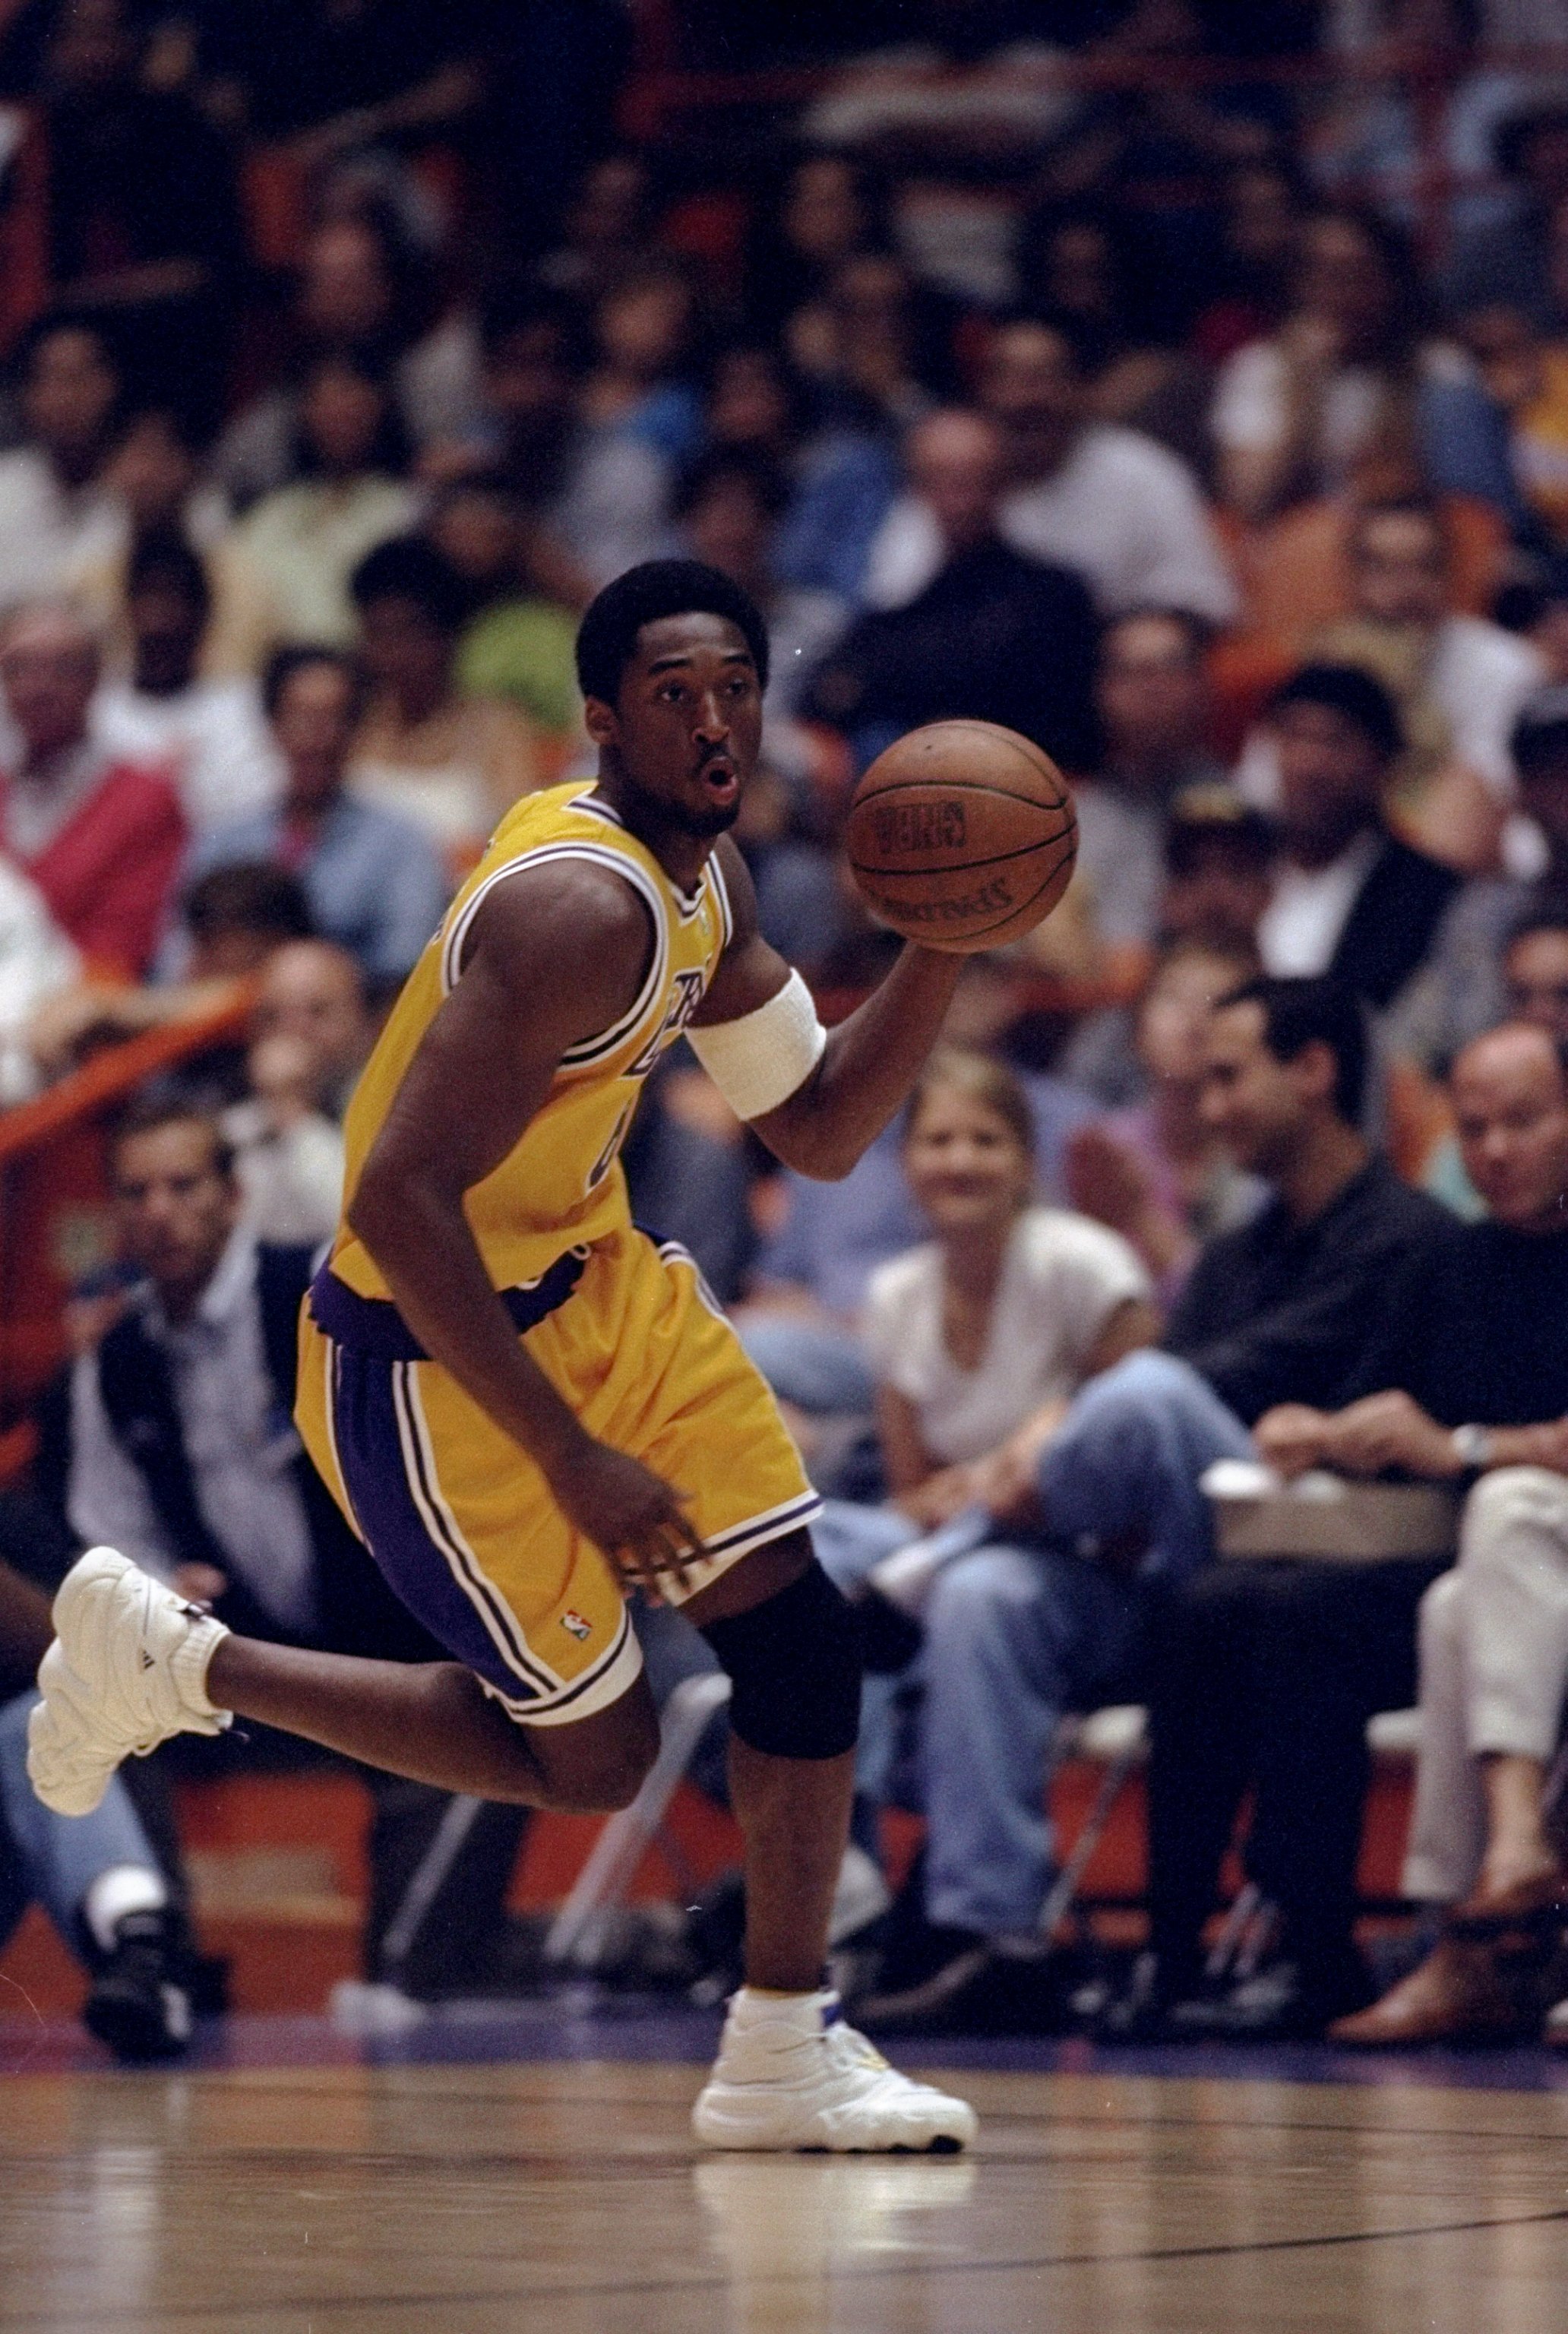 26 Apr 1998: Guard Kobe Bryant of the Los Angeles Lakers in action against the Portland Trail Blazers during an NBA playoff game at the Great Western Forum in Inglewod, California. The Lakers defeated the Trail Blazers 109-98.